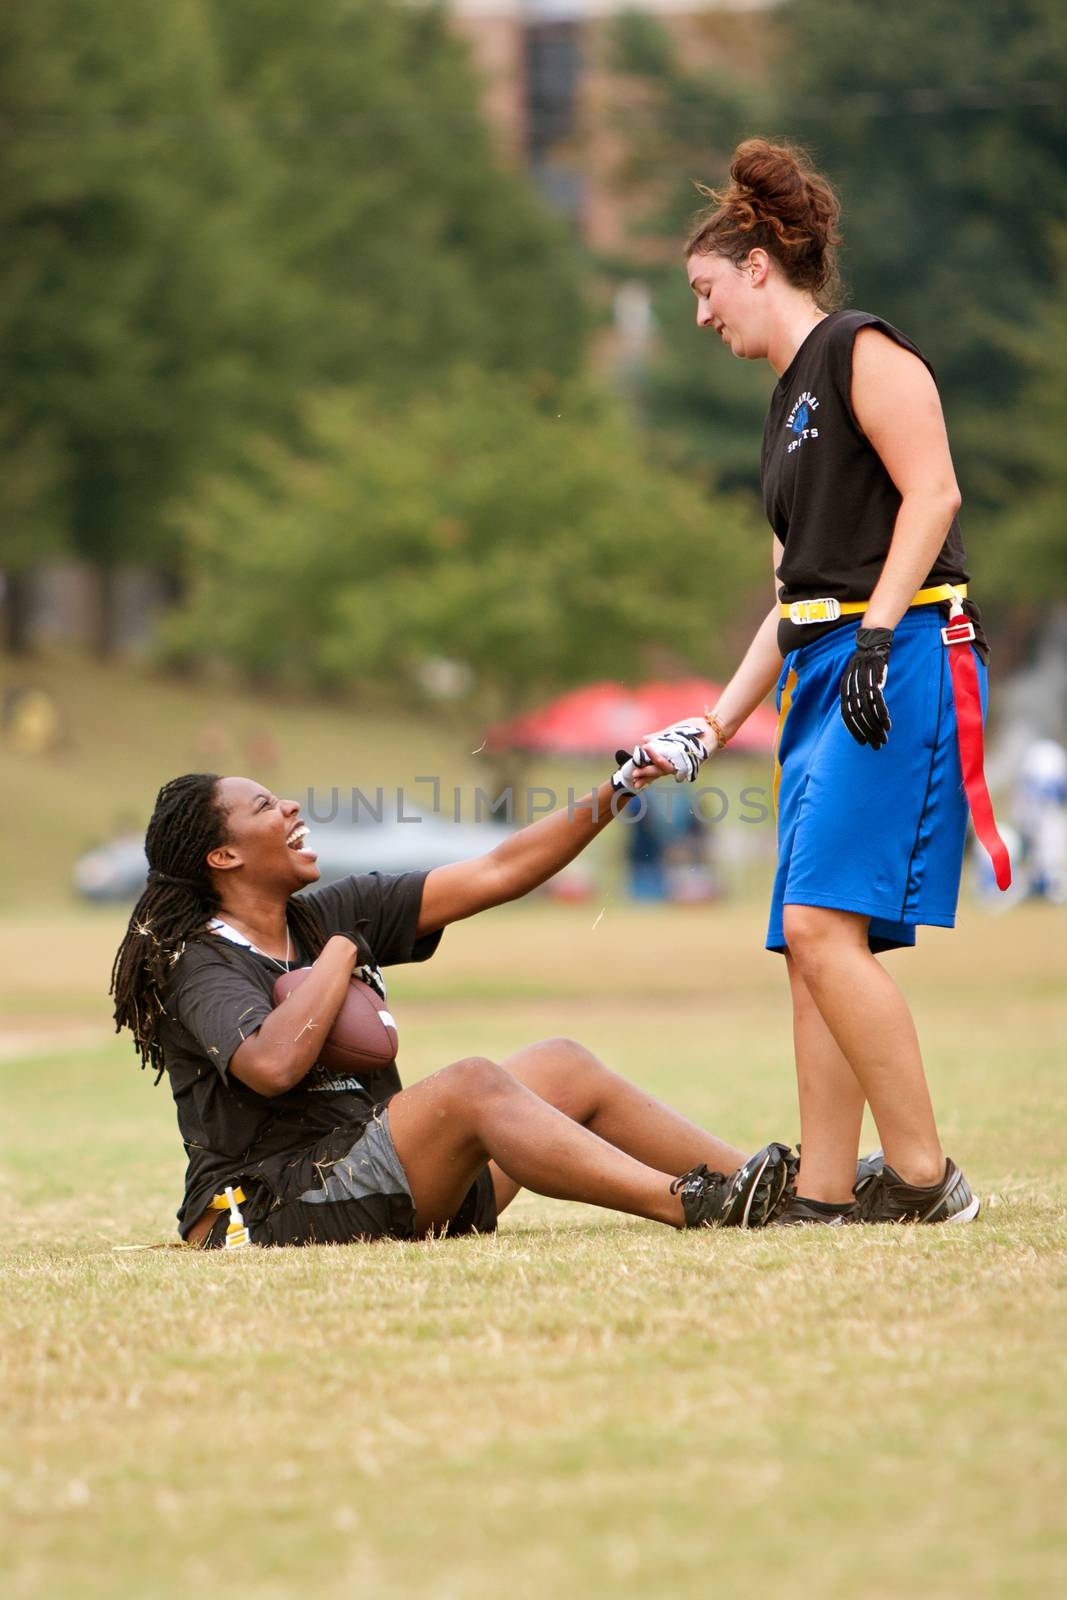 Atlanta, GA, USA - September 29, 2012:  One player lends a hand to help a teammate off the ground, during practice for the Krush team of the Atlanta Women's Flag Football League.  The practice was held at an Atlanta public park.